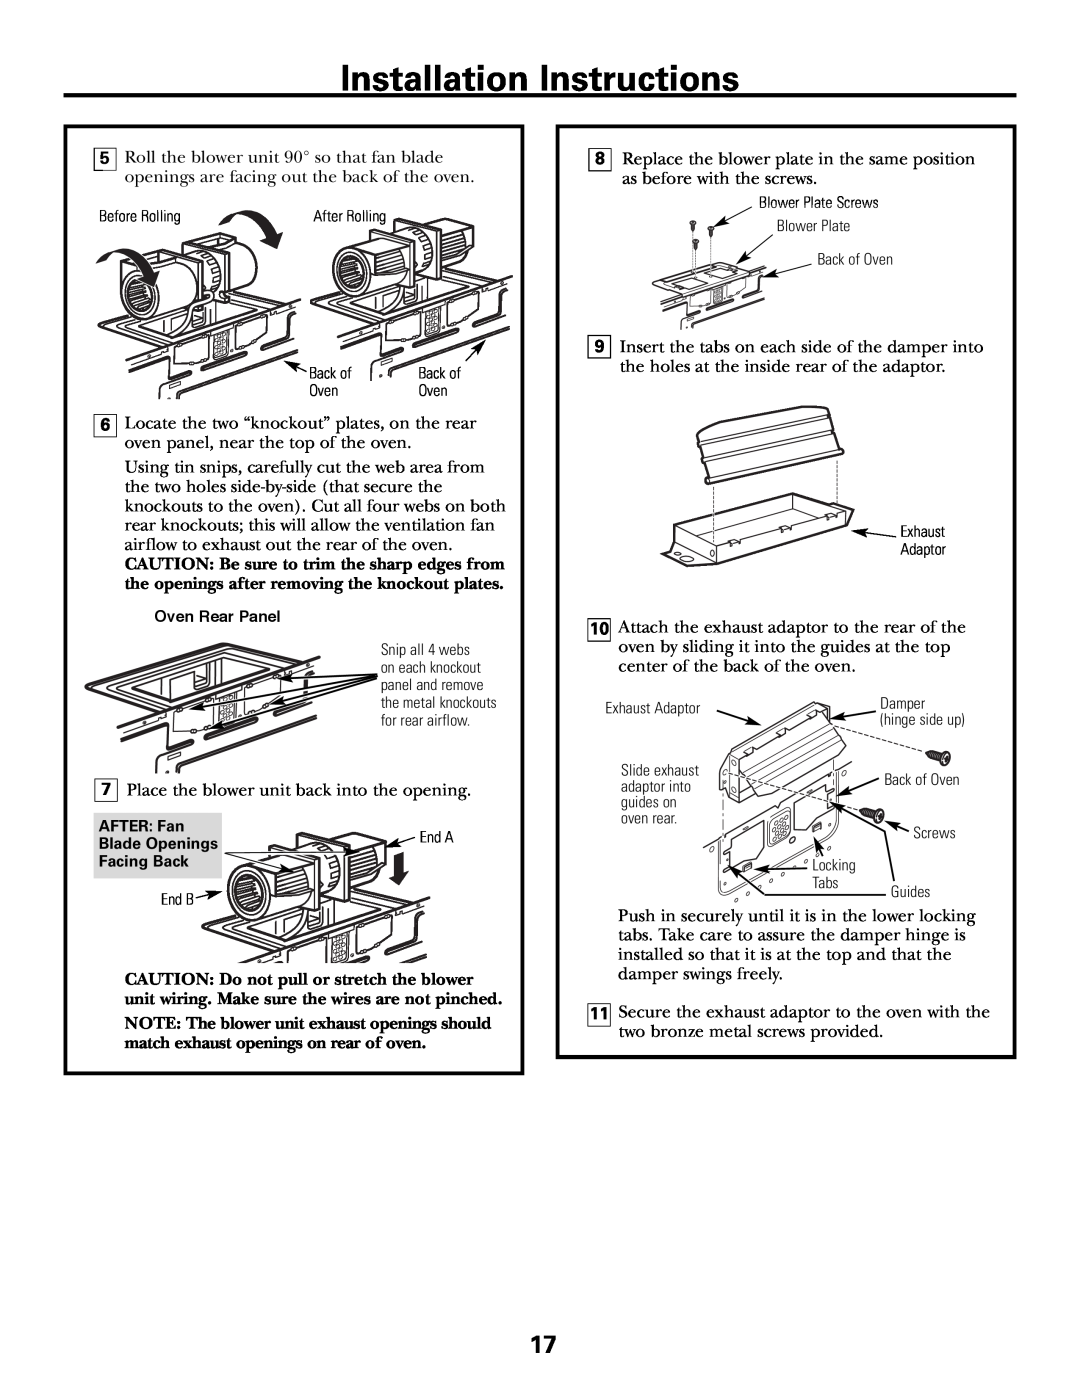 GE JVM1790 installation instructions Installation Instructions, Place the blower unit back into the opening 